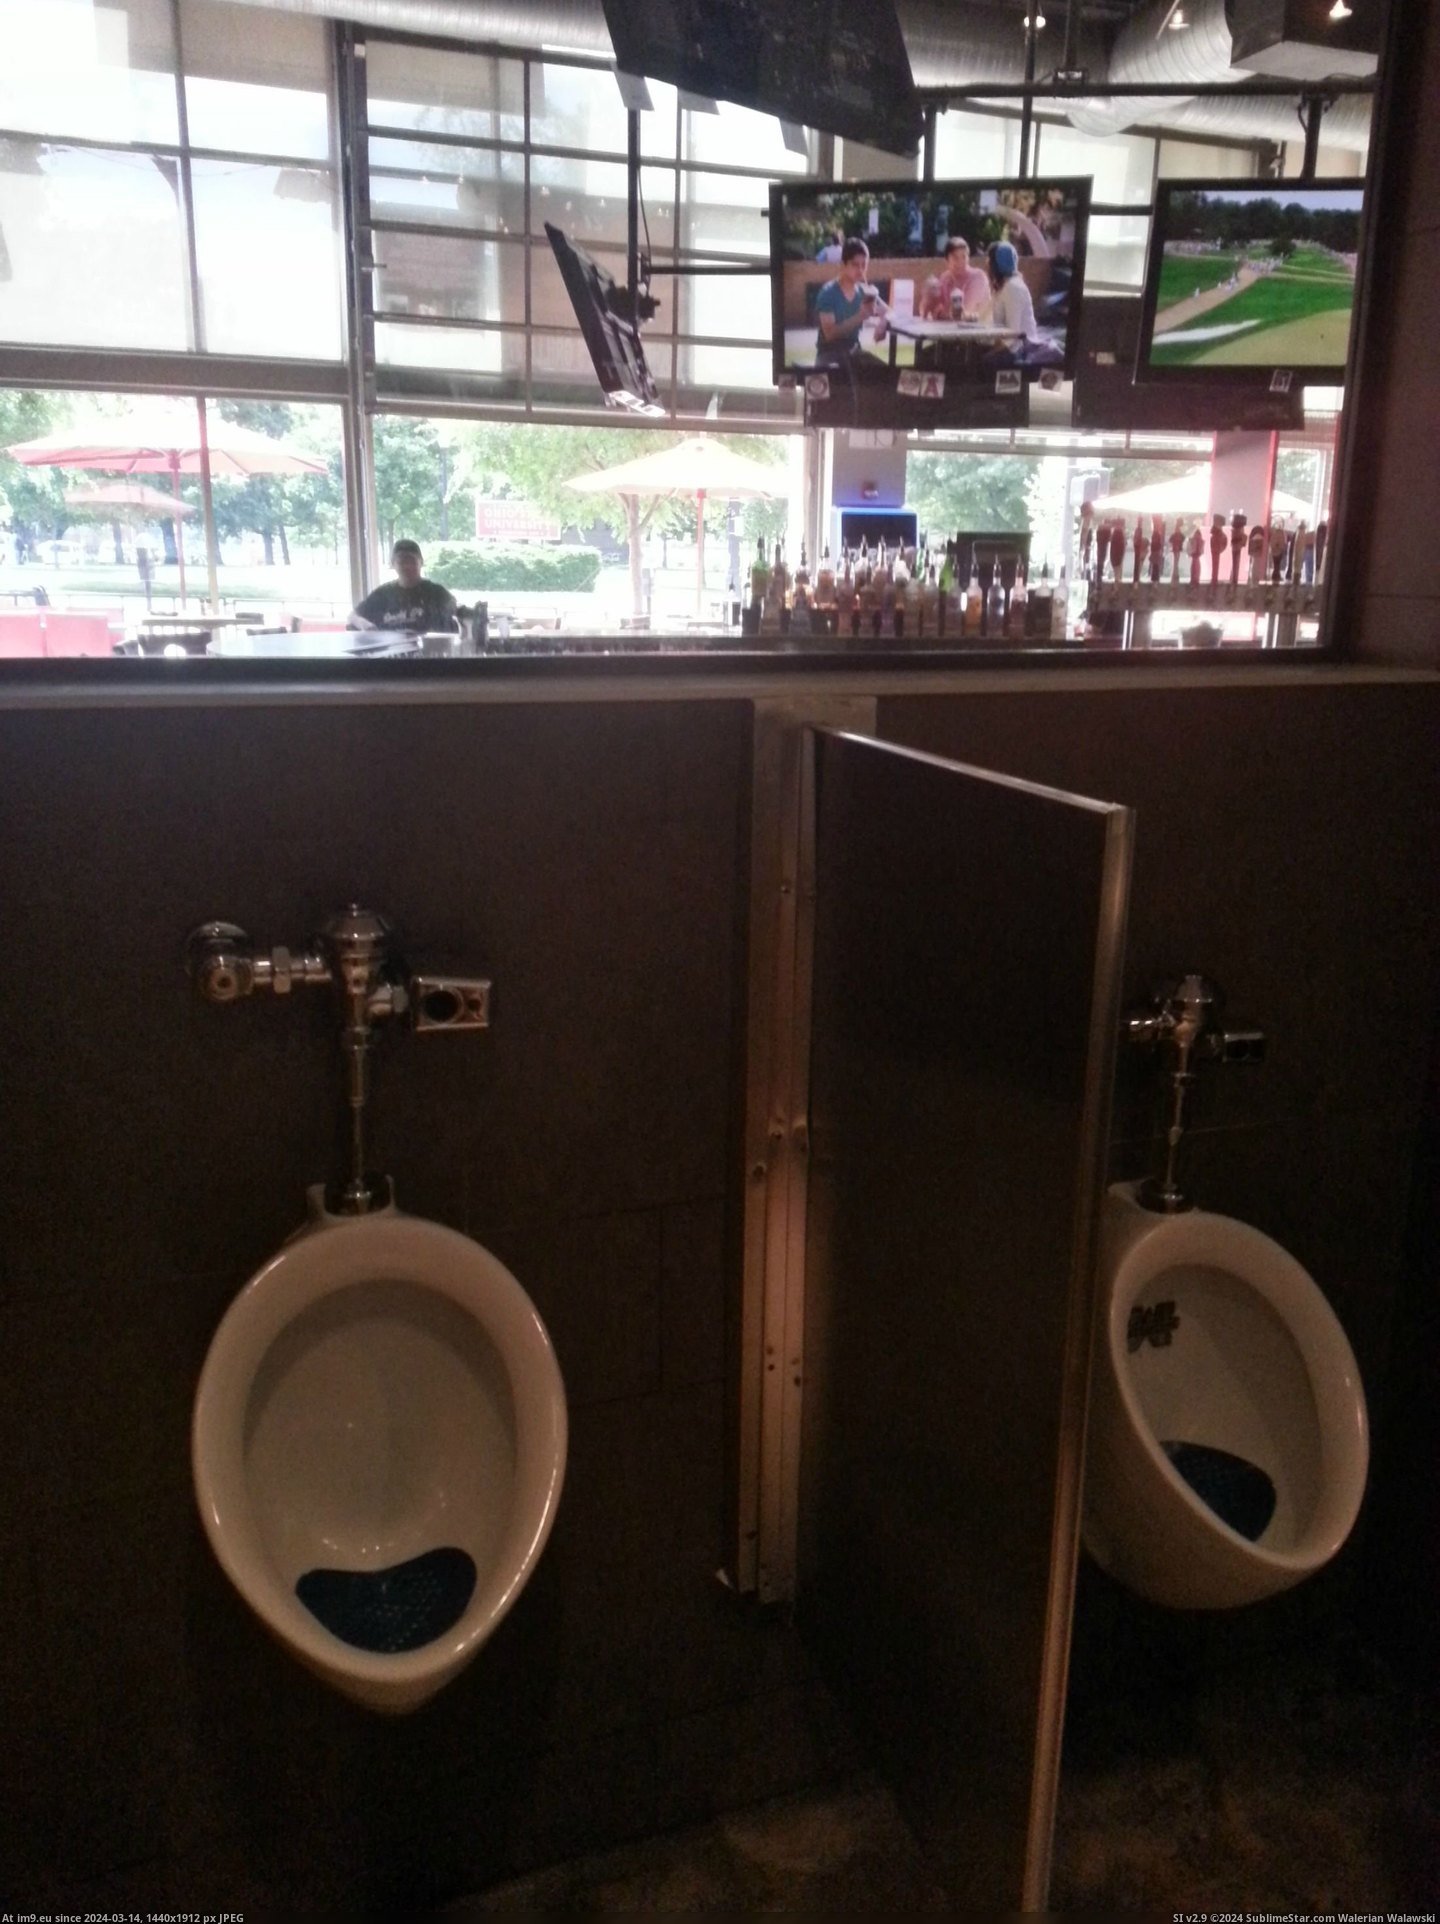 #One #You #Game #Bar #Sports #Bathrooms #Way #Glass #Any [Mildlyinteresting] This sports bar has one way glass in the bathrooms so you don't miss any of the game Pic. (Изображение из альбом My r/MILDLYINTERESTING favs))